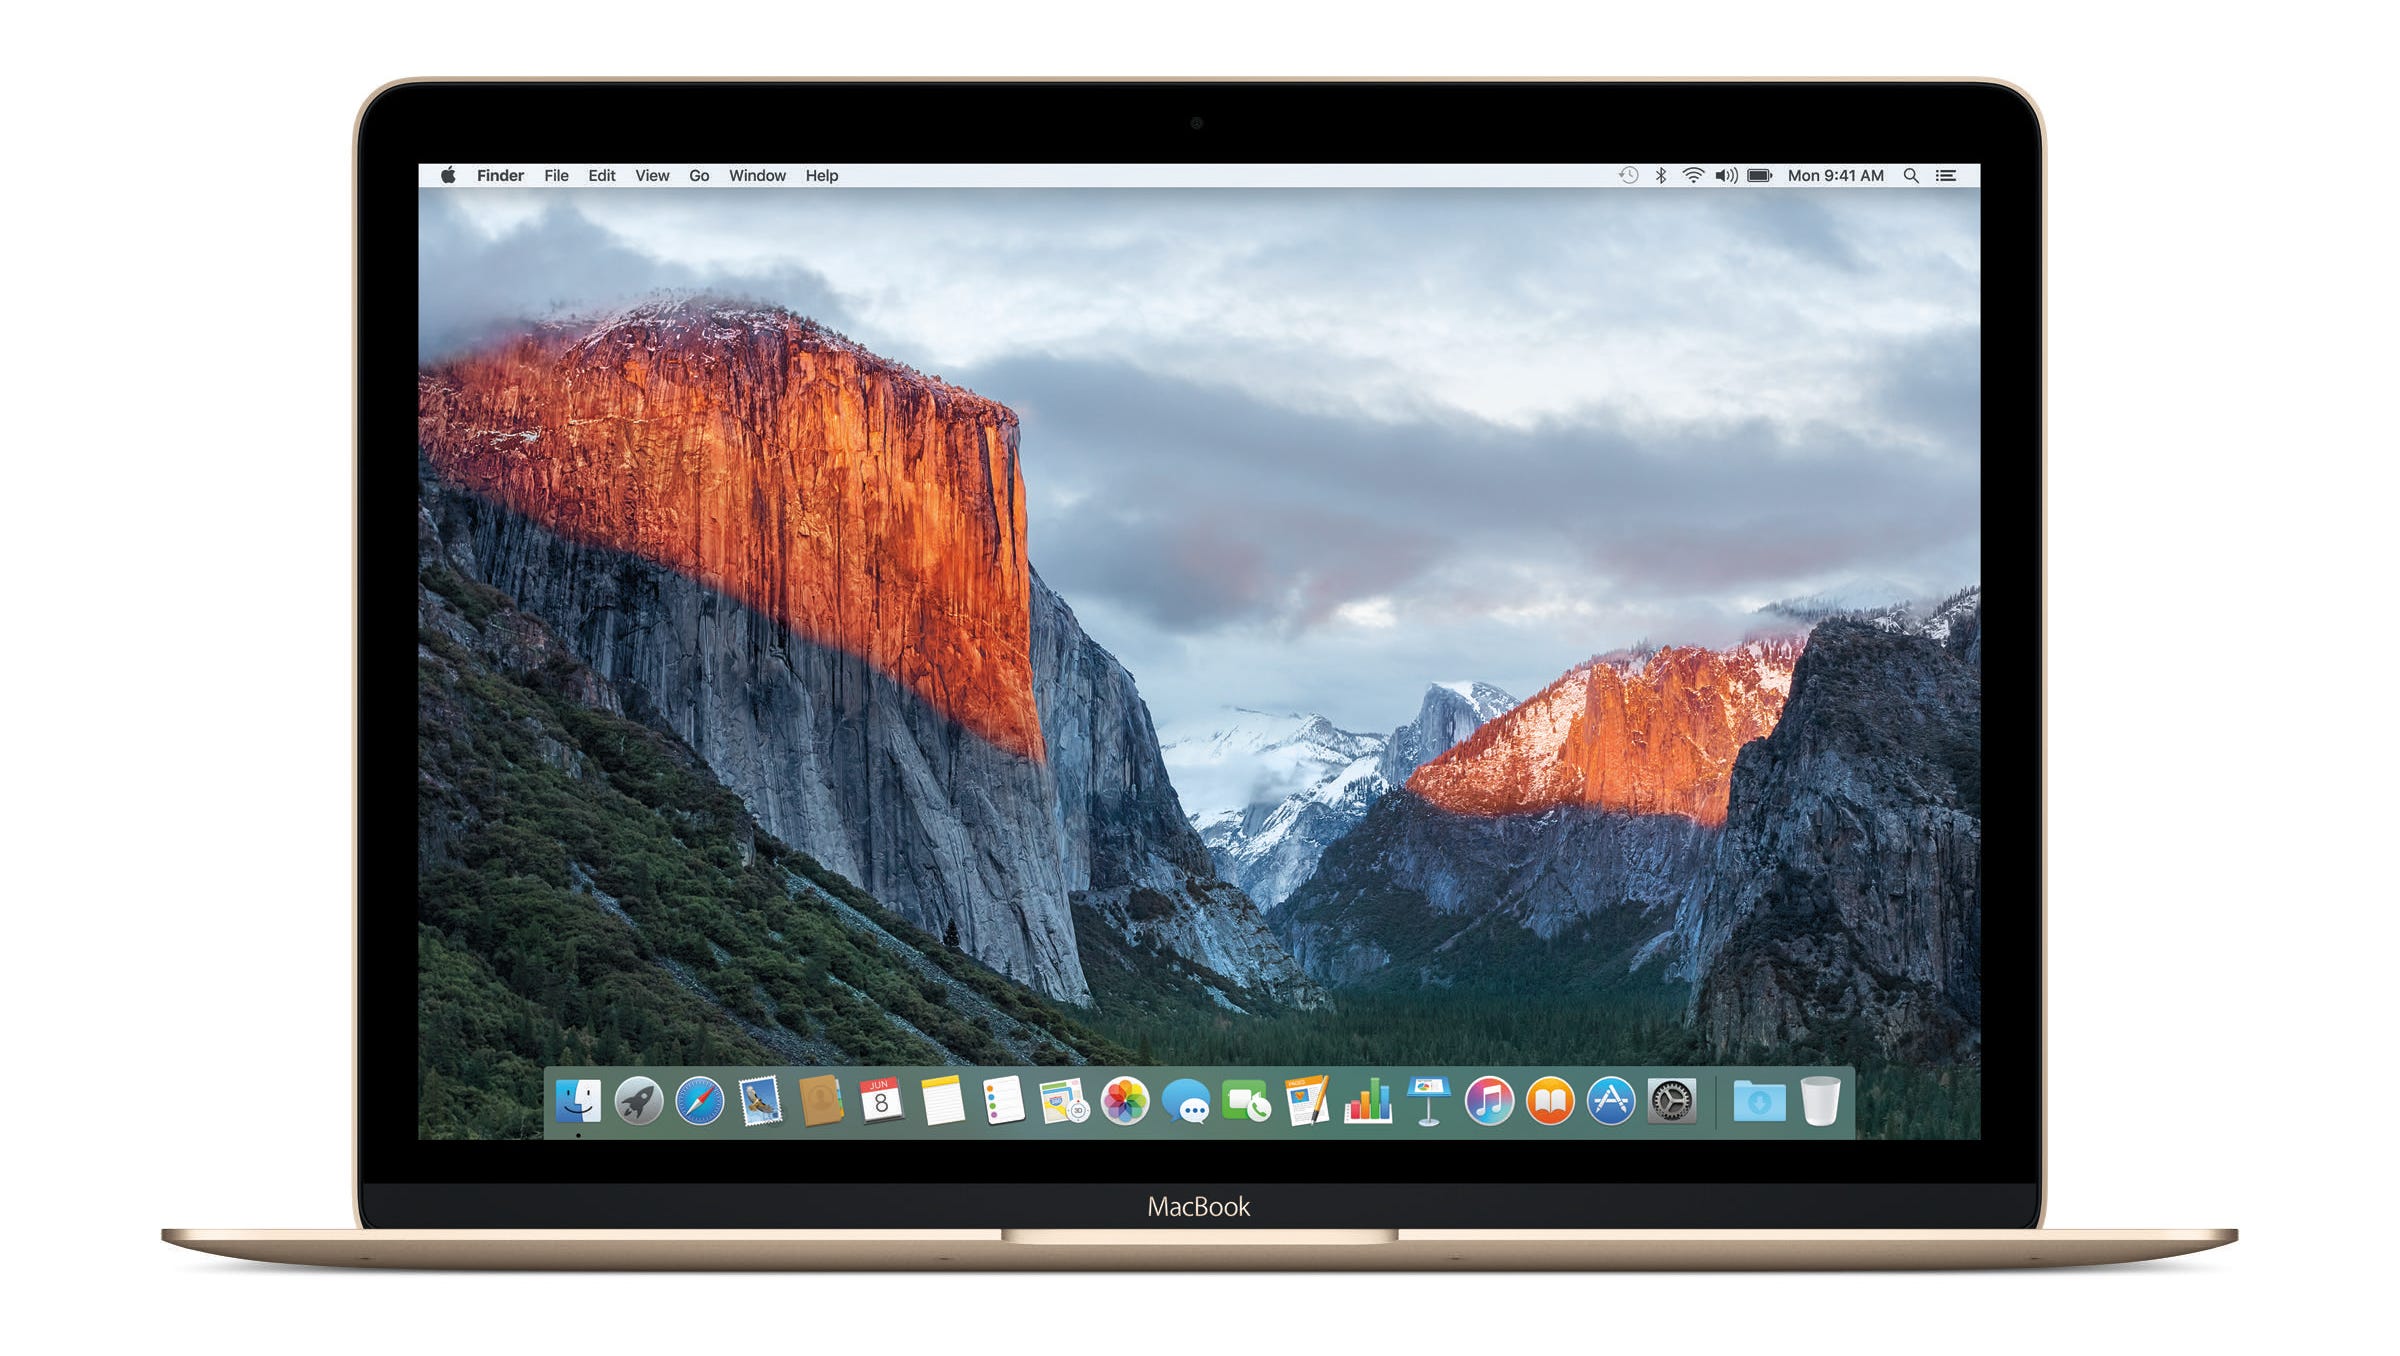 Mac OS X El Capitan: Modest upgrade promises welcome features